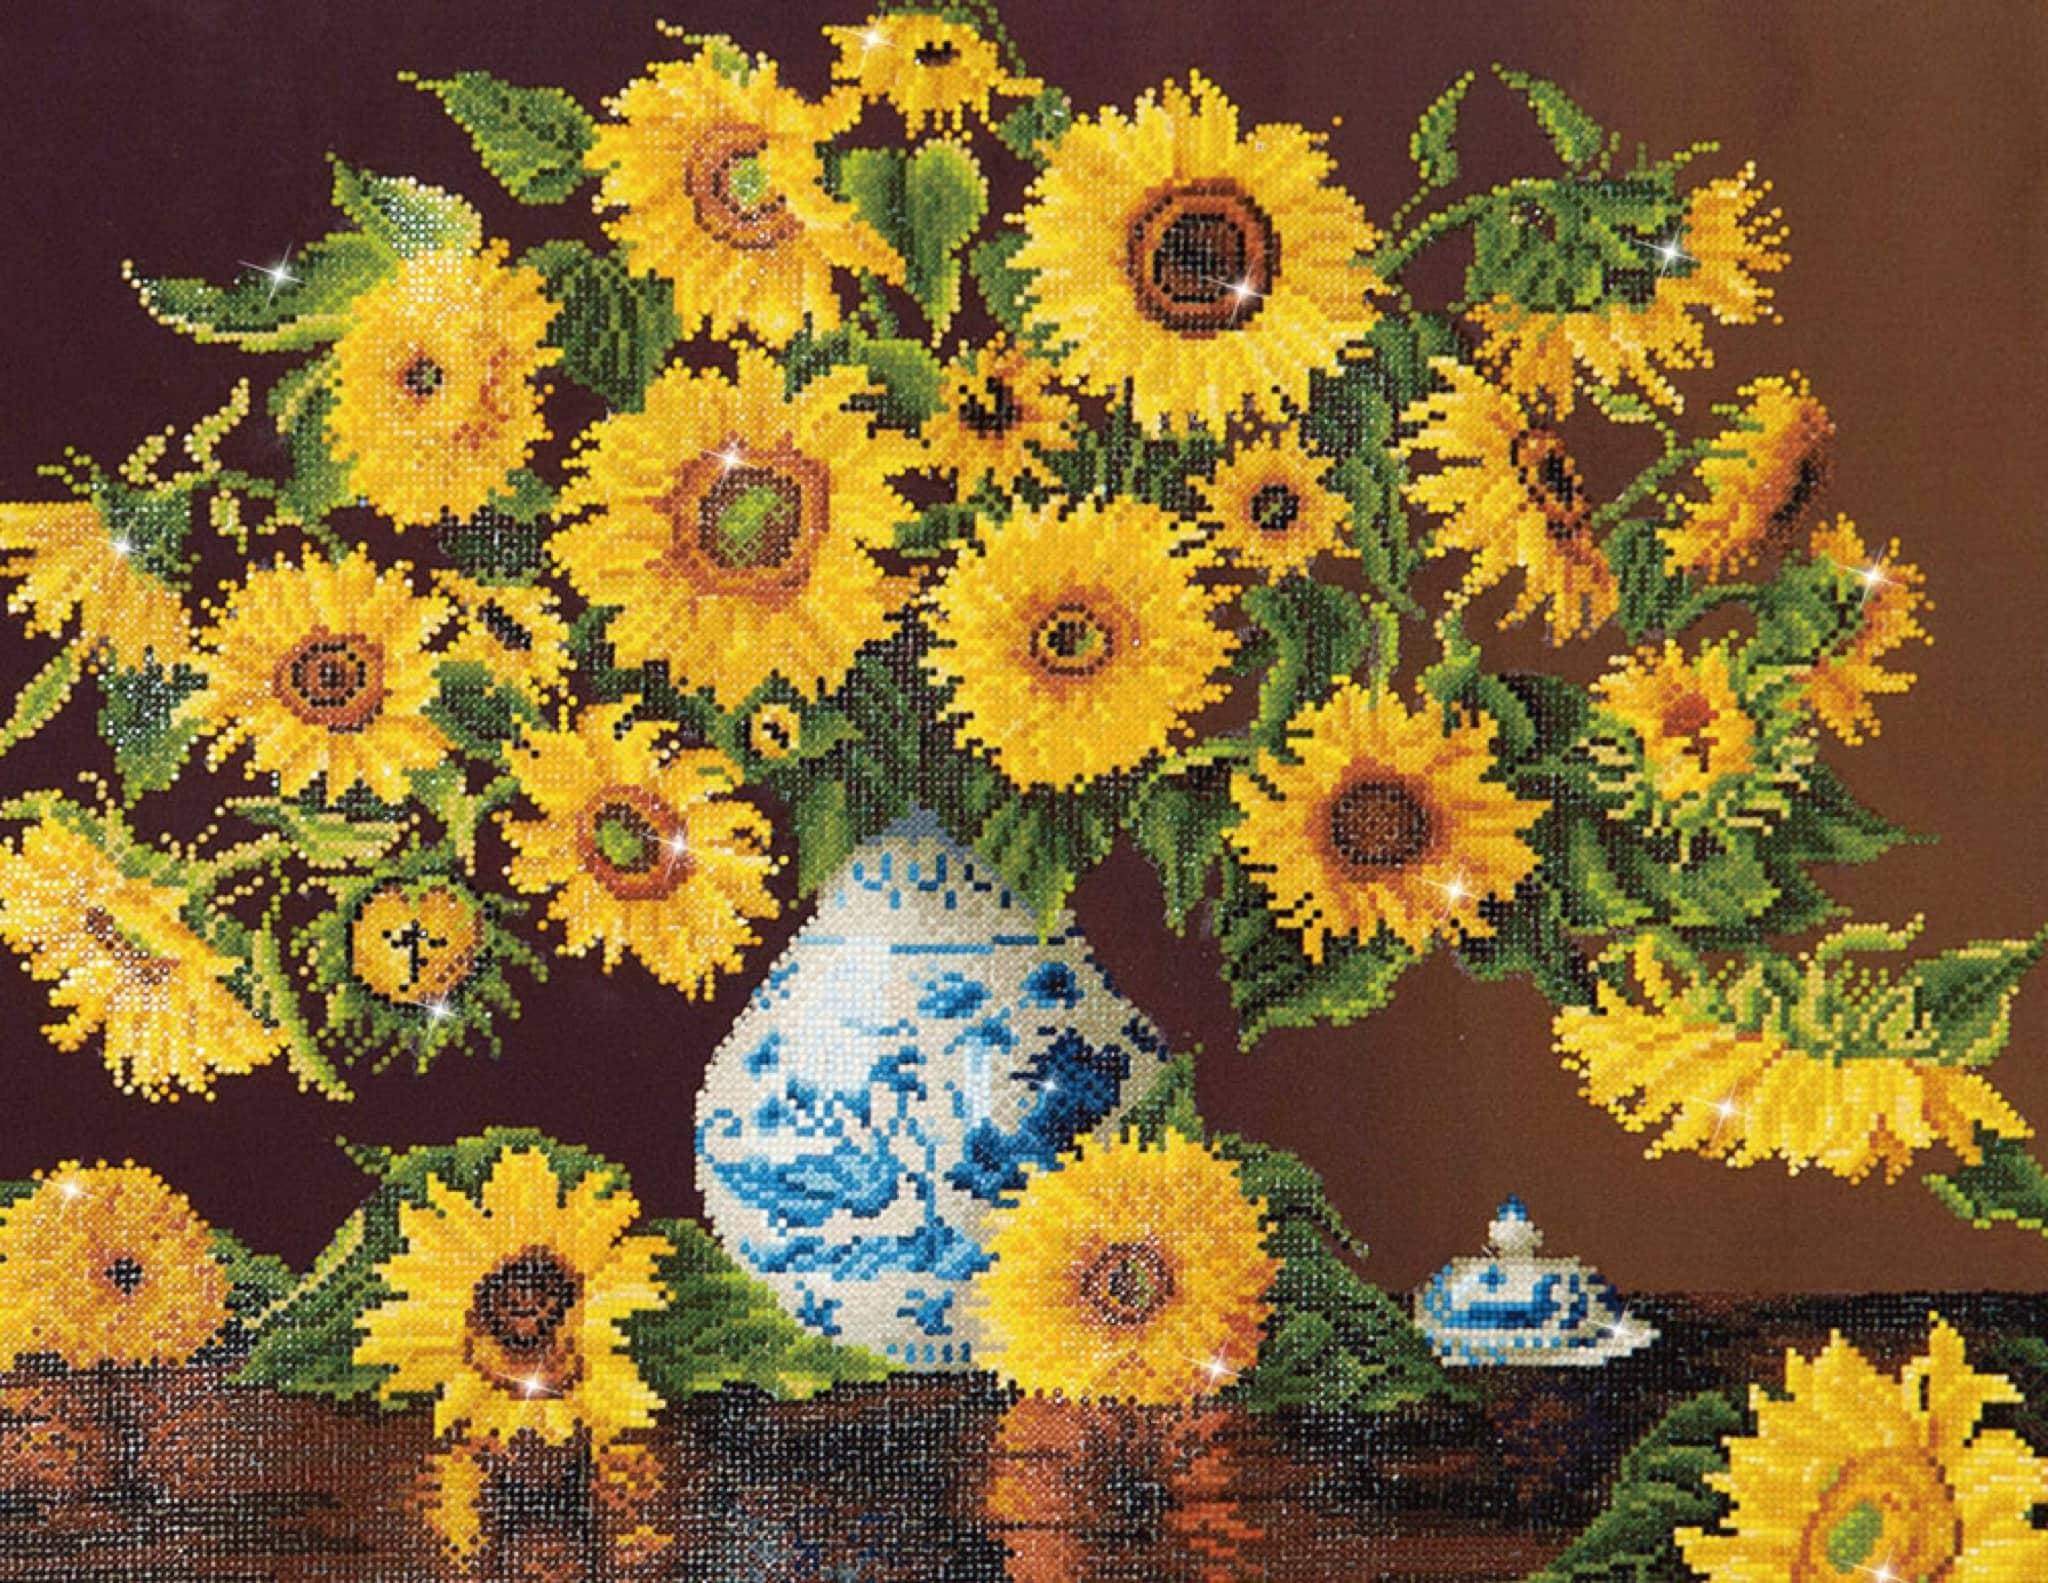 Sunflowers in a China Vase Diamond Painting Kit